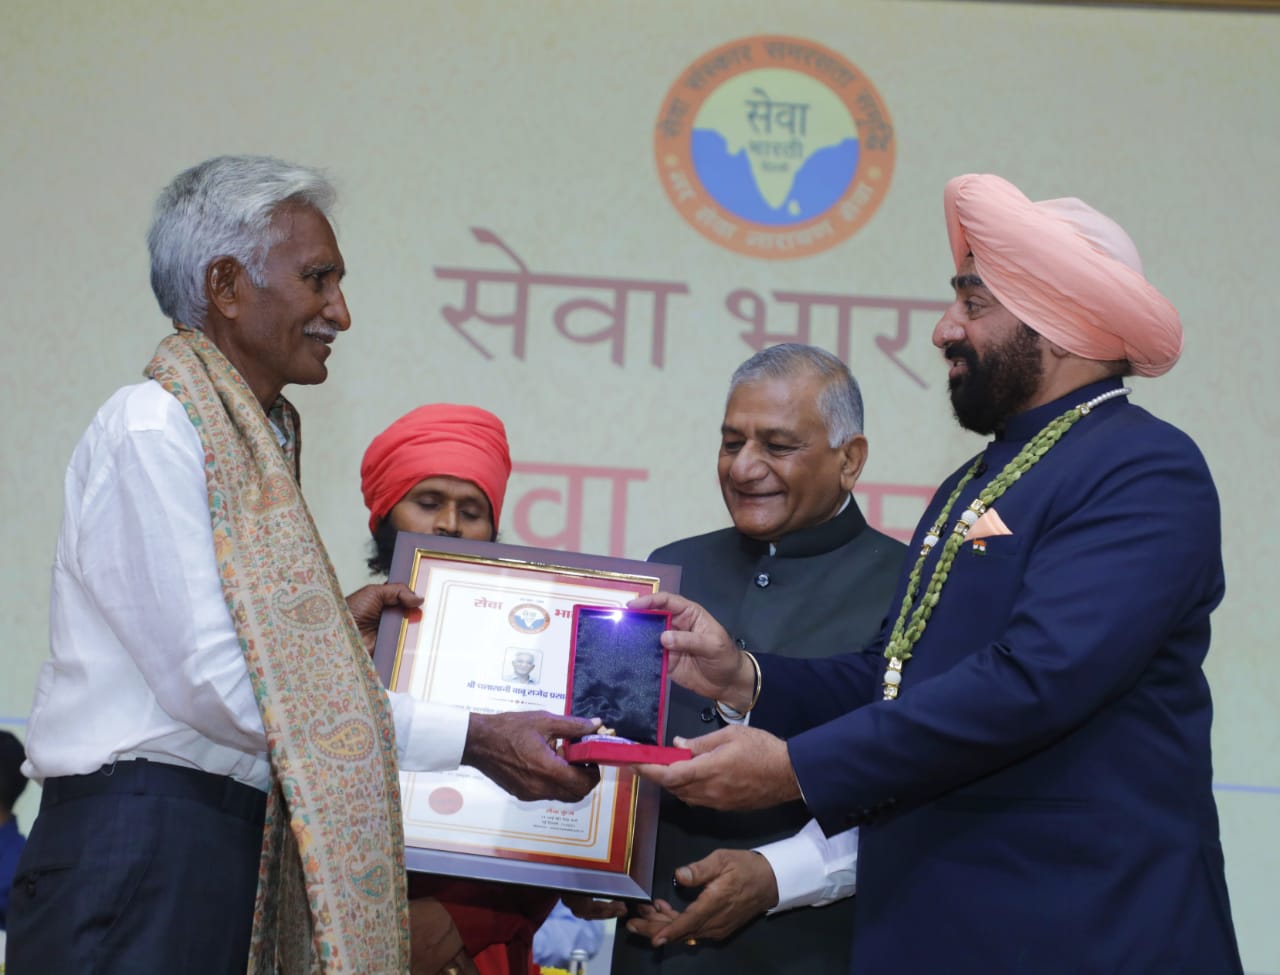 Governor honours 25 persons at Seva Bharti function for their contribution to society